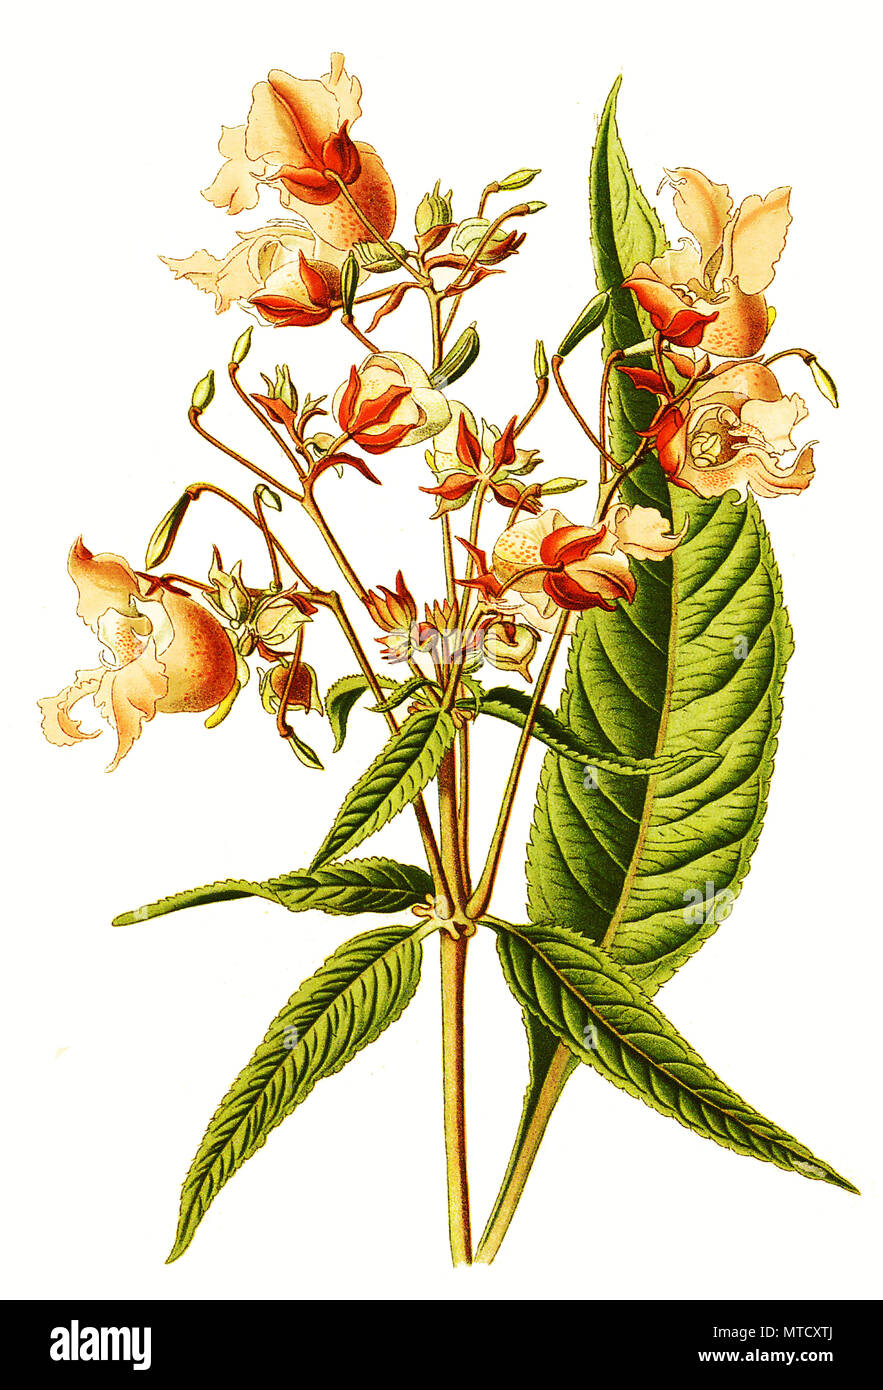 Impatiens roylei, Royle's Balsam, digital improved reproduction from a print of the 19th century Stock Photo